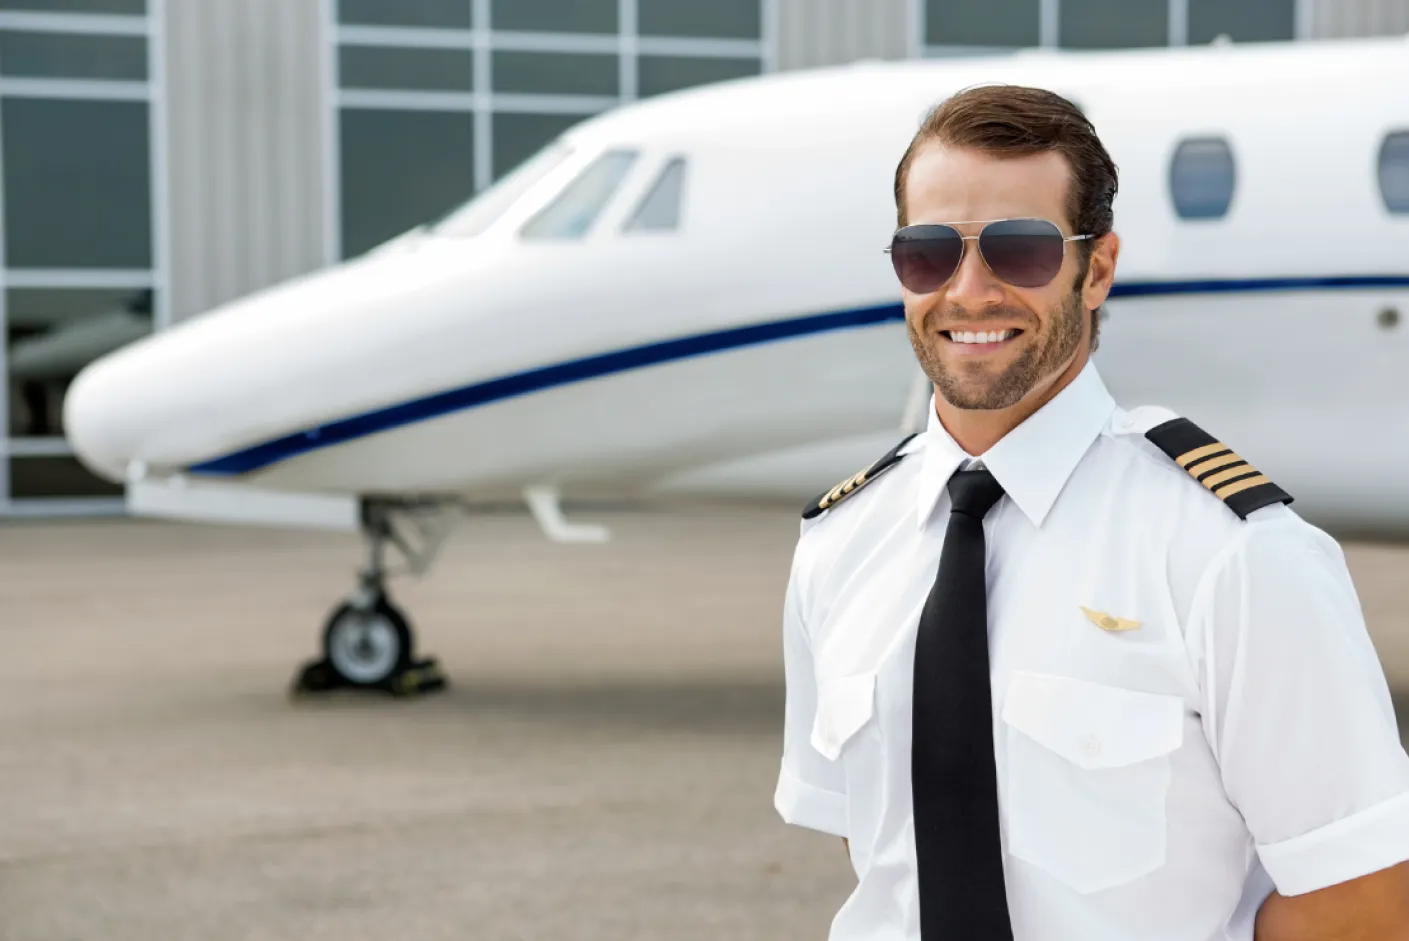 Instrument rating test: Prepare for and pass the official exam with practice questions